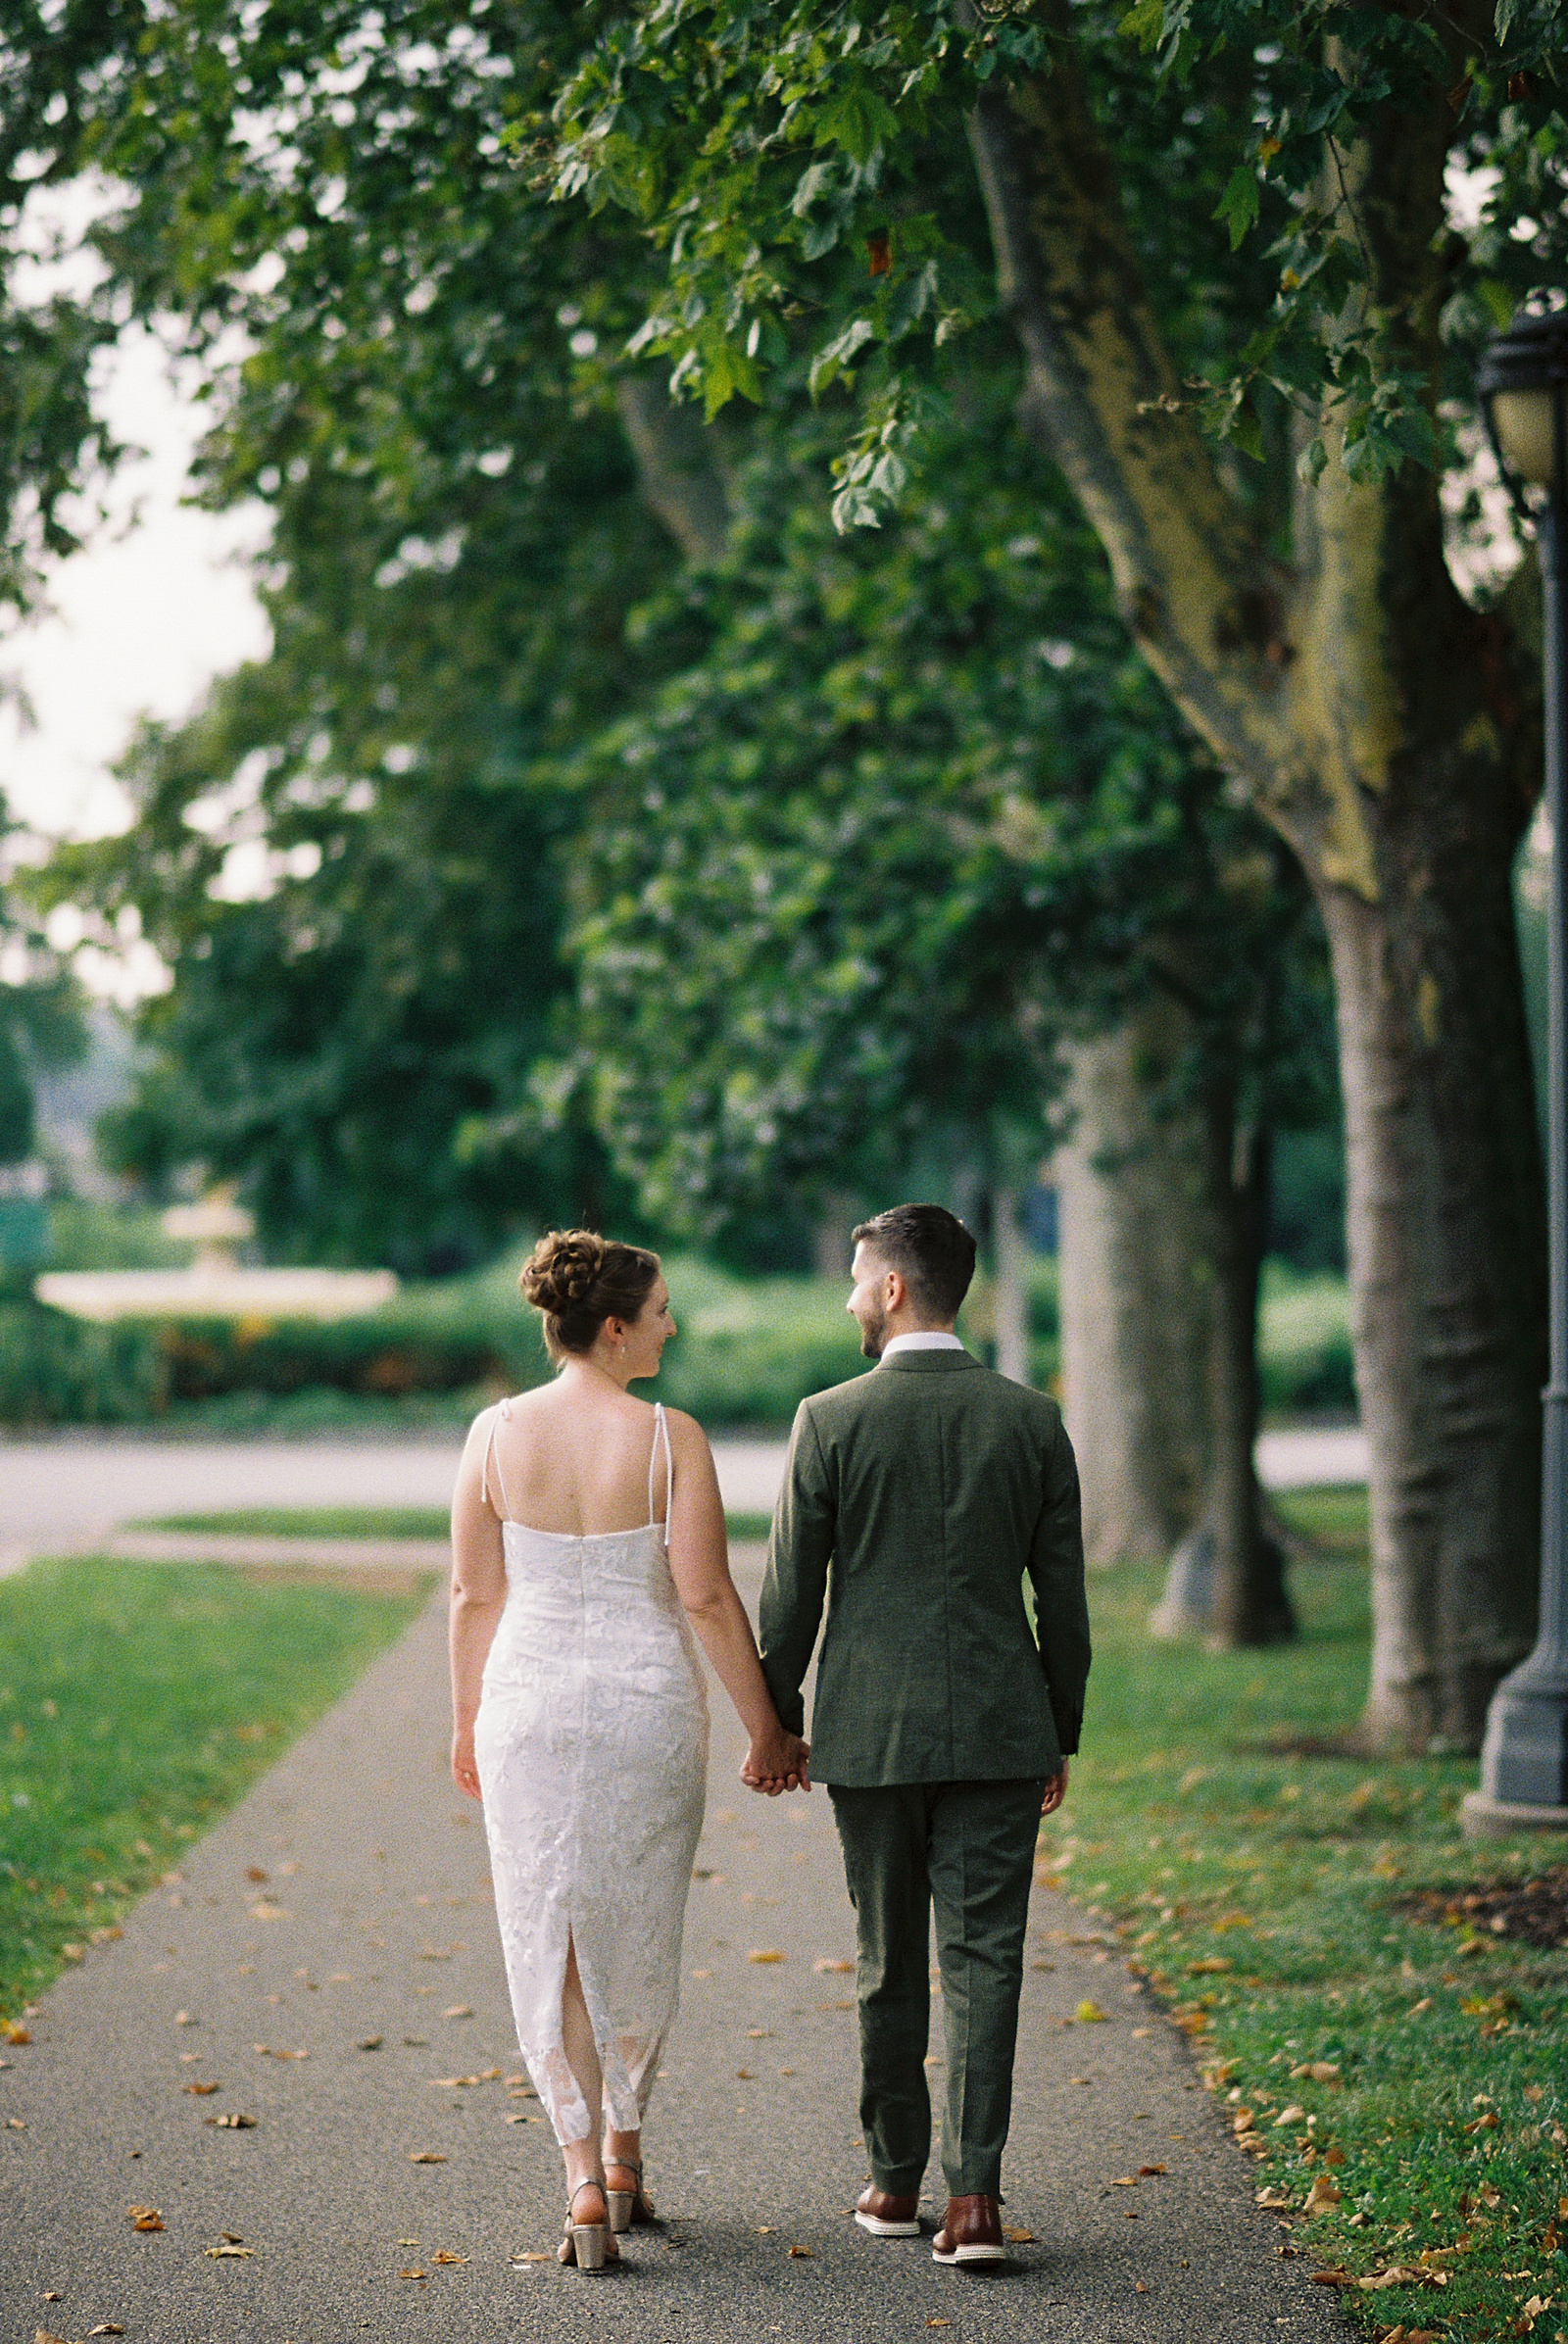 A bride and groom hold hands walking away from a Philadelphia wedding photographer.